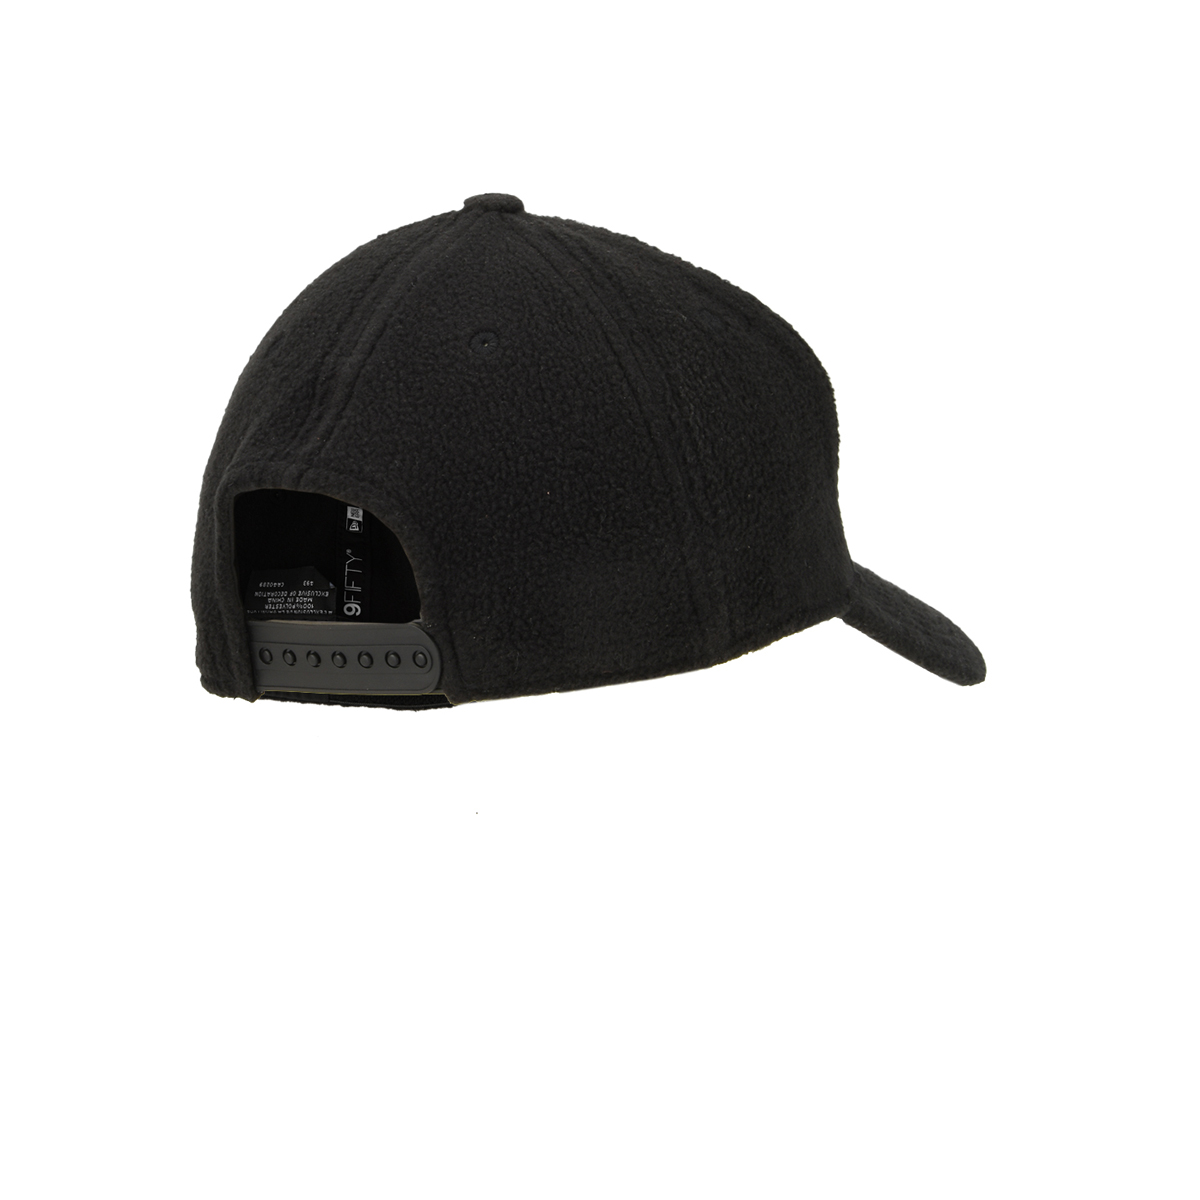 Gorra New Era Fleece 9Fiftyss Manchester United,  image number null